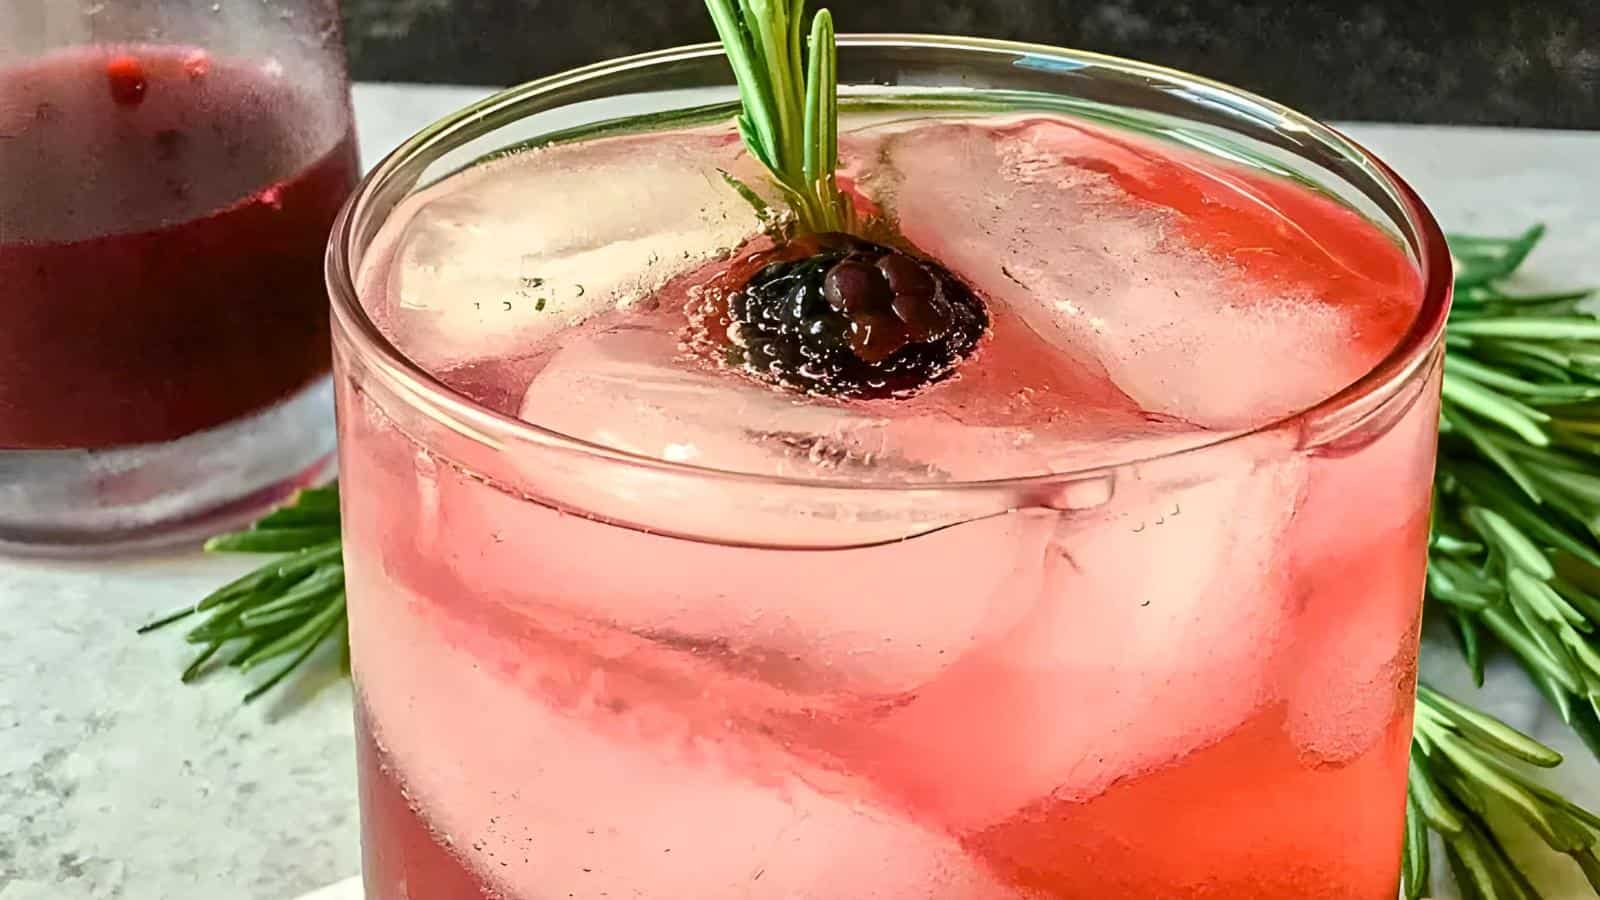 <p>Enjoy the herbal notes of a Blackberry-Rosemary Vodka & Soda. This summer drink pairs fresh blackberries with rosemary-infused vodka and soda water. It’s a refreshing and unique twist on a classic cocktail.<br><strong>Get the Recipe: </strong><a href="https://notentirelyaverage.com/a-blackberry-rosemary-vodka-soda/?utm_source=msn&utm_medium=page&utm_campaign=msn">Blackberry-Rosemary Vodka & Soda</a></p>